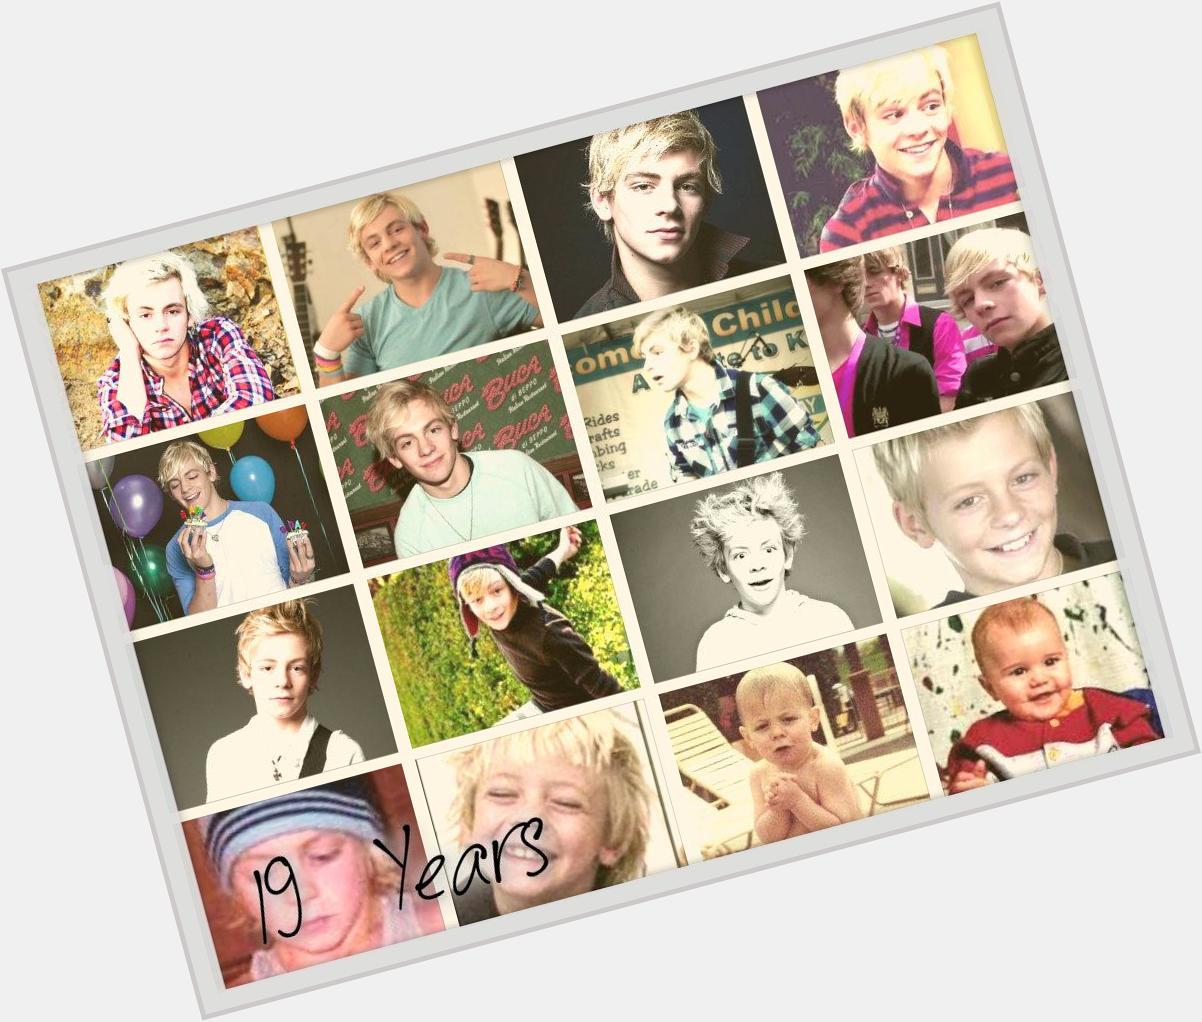  Happy Birthday Ross Lynch am one of your fans and I will be until death Ilove
You follow me I would apprecia 